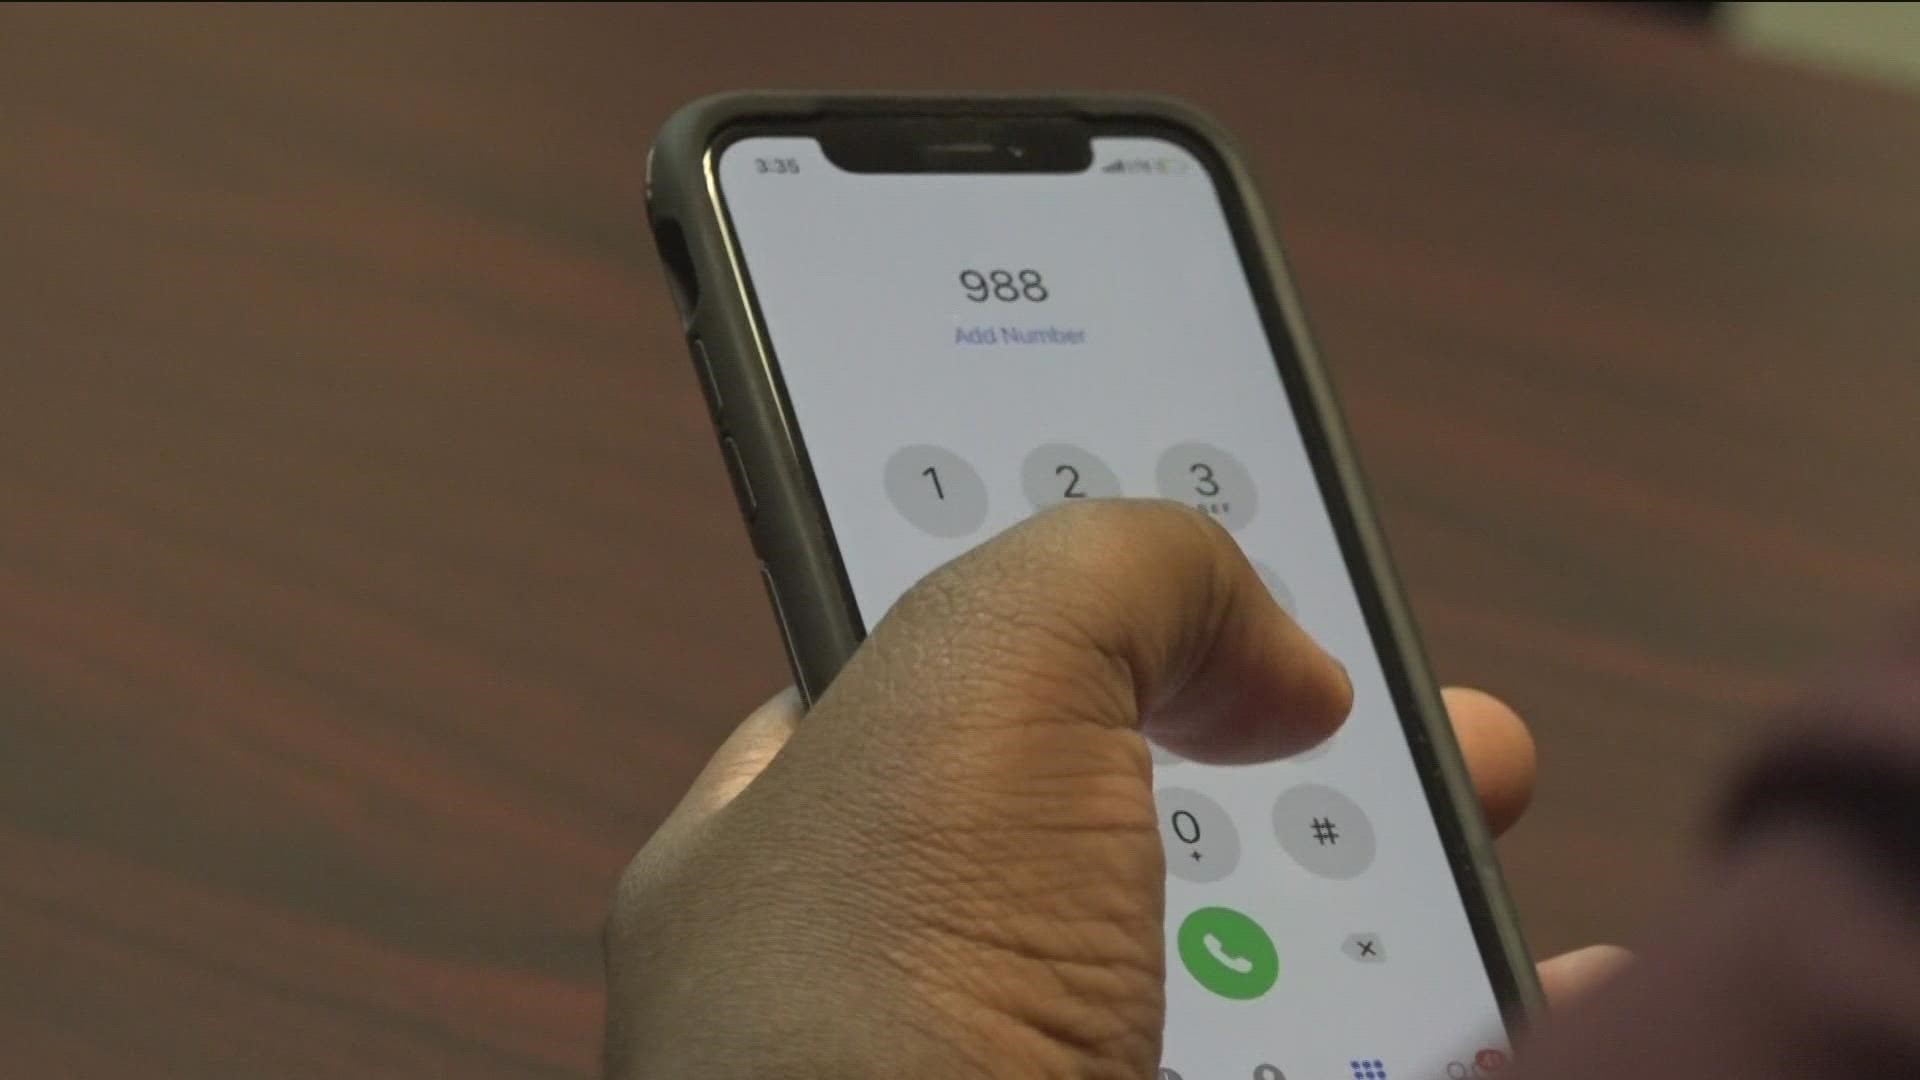 A new three-digit number will soon become a suicide and crisis lifeline set to launch nationwide on Saturday, July 16.